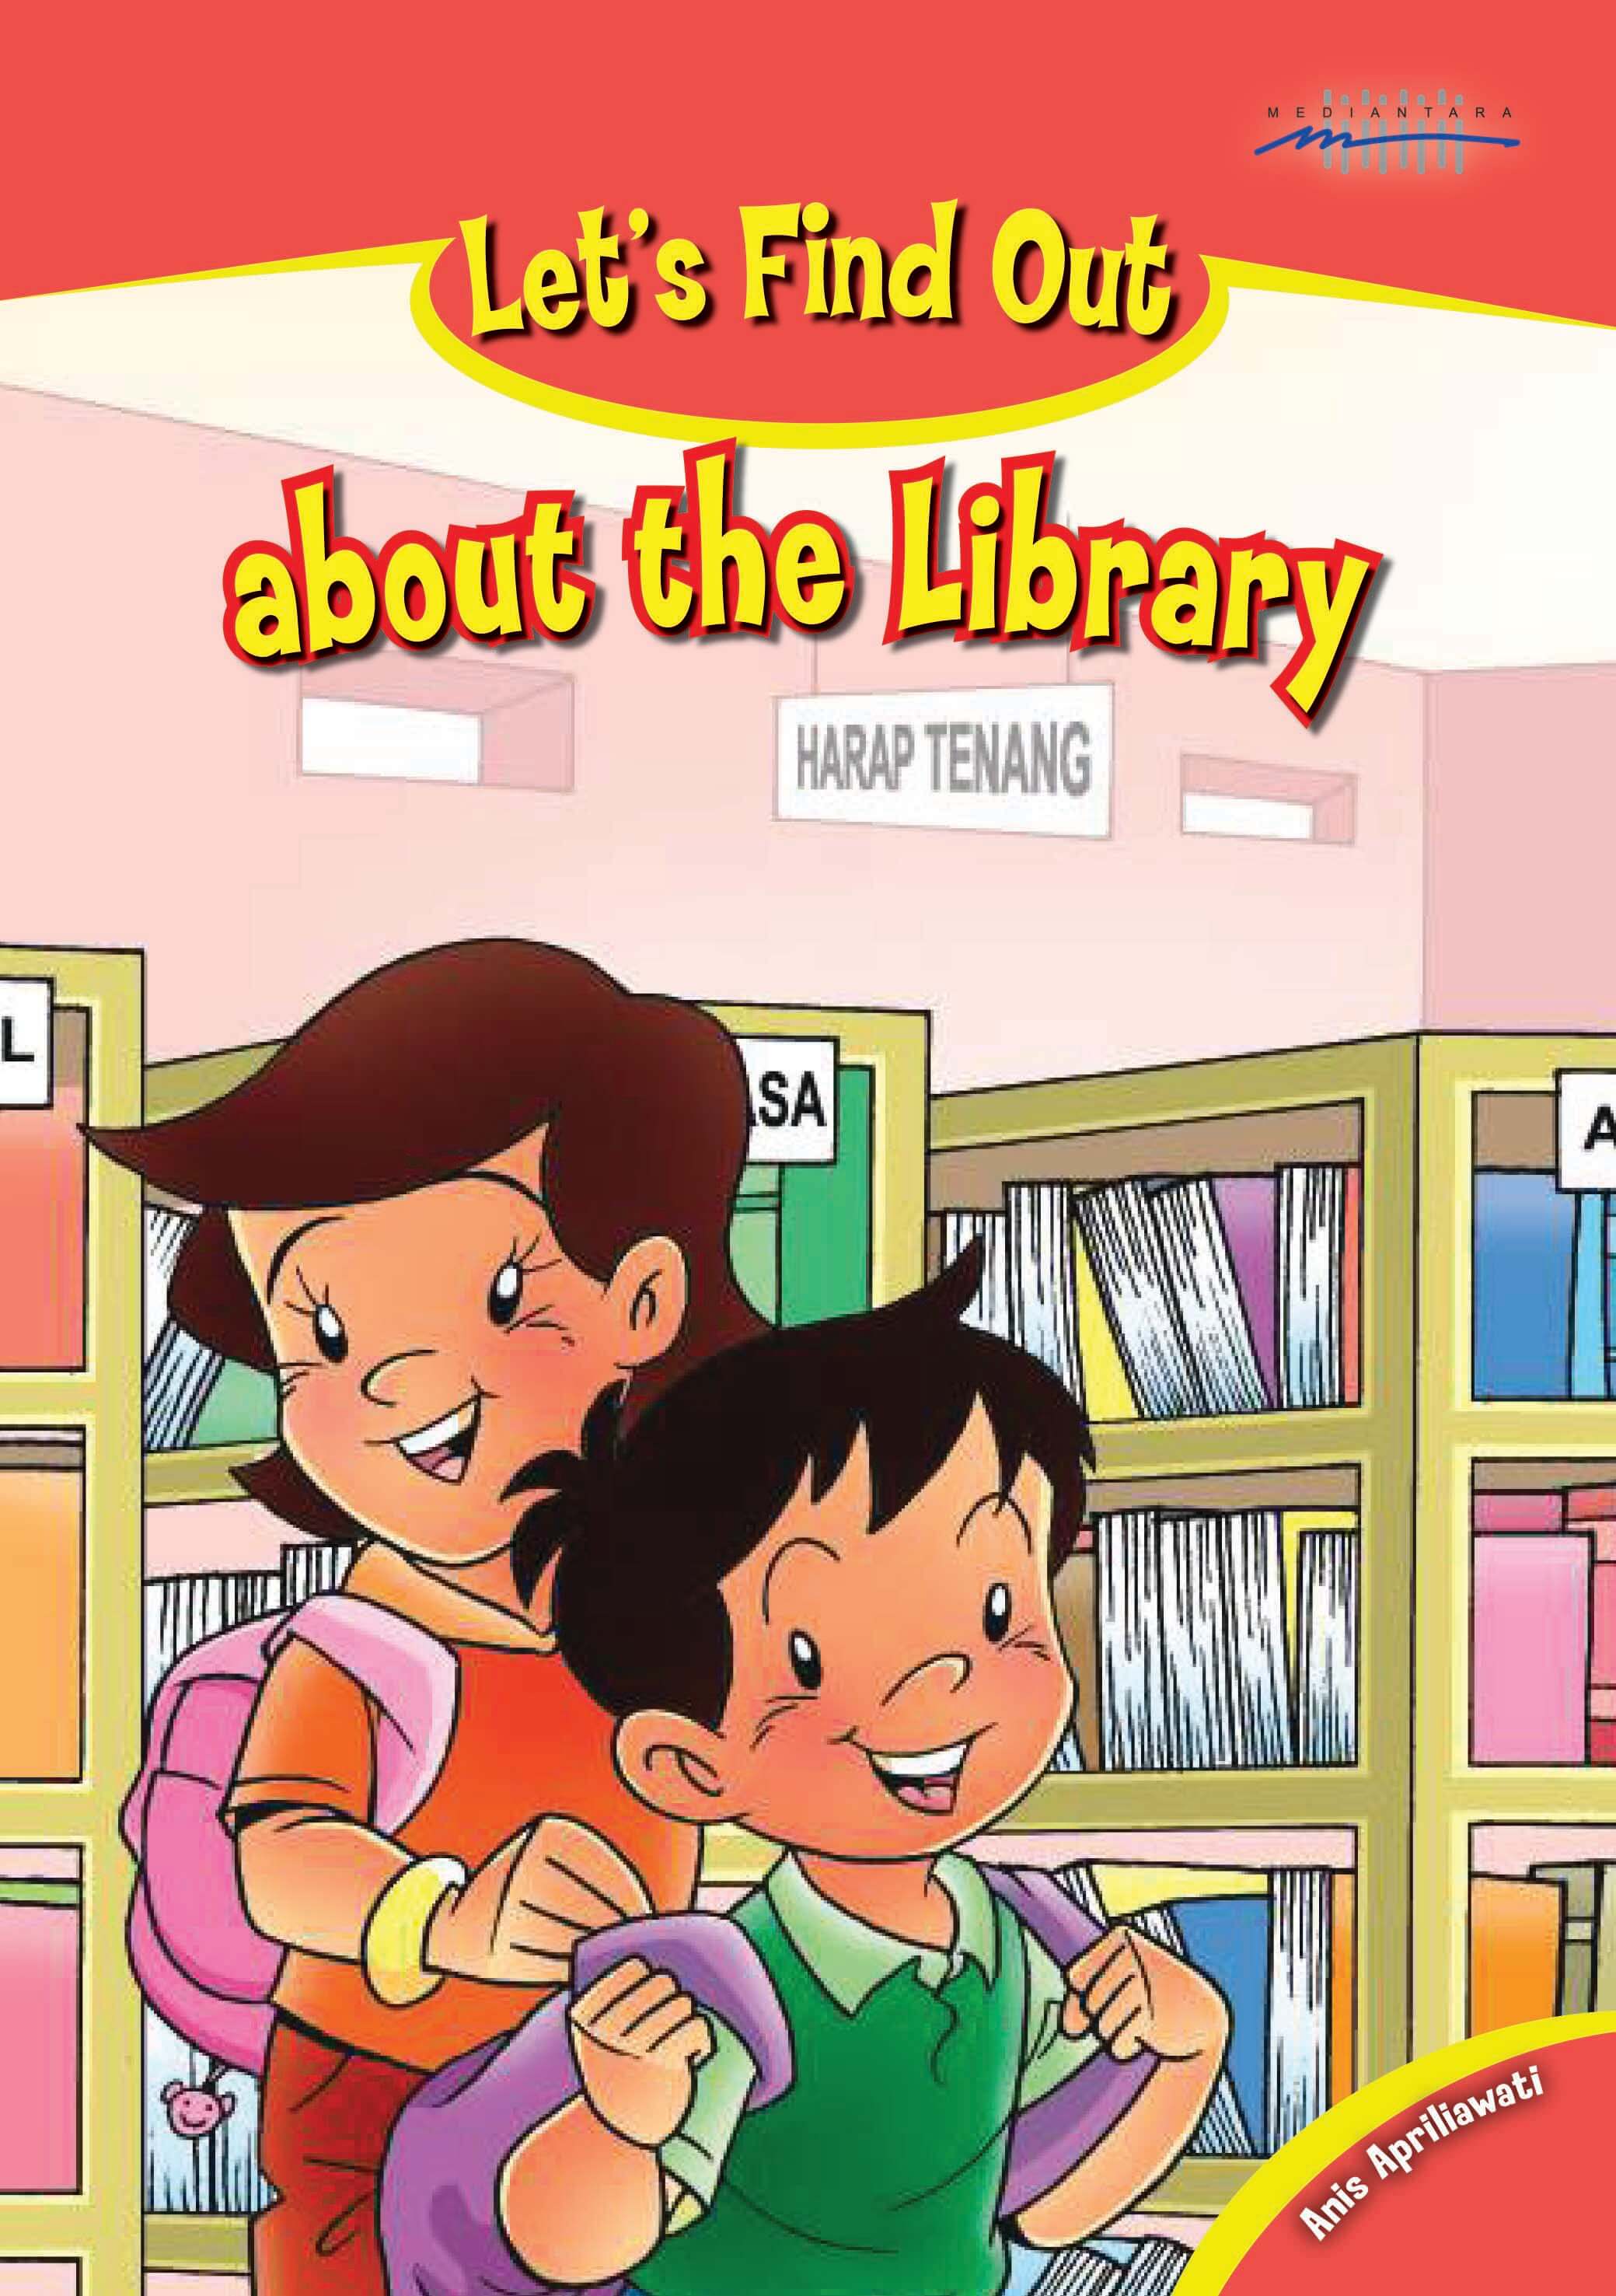 Let's Find Out about the Library